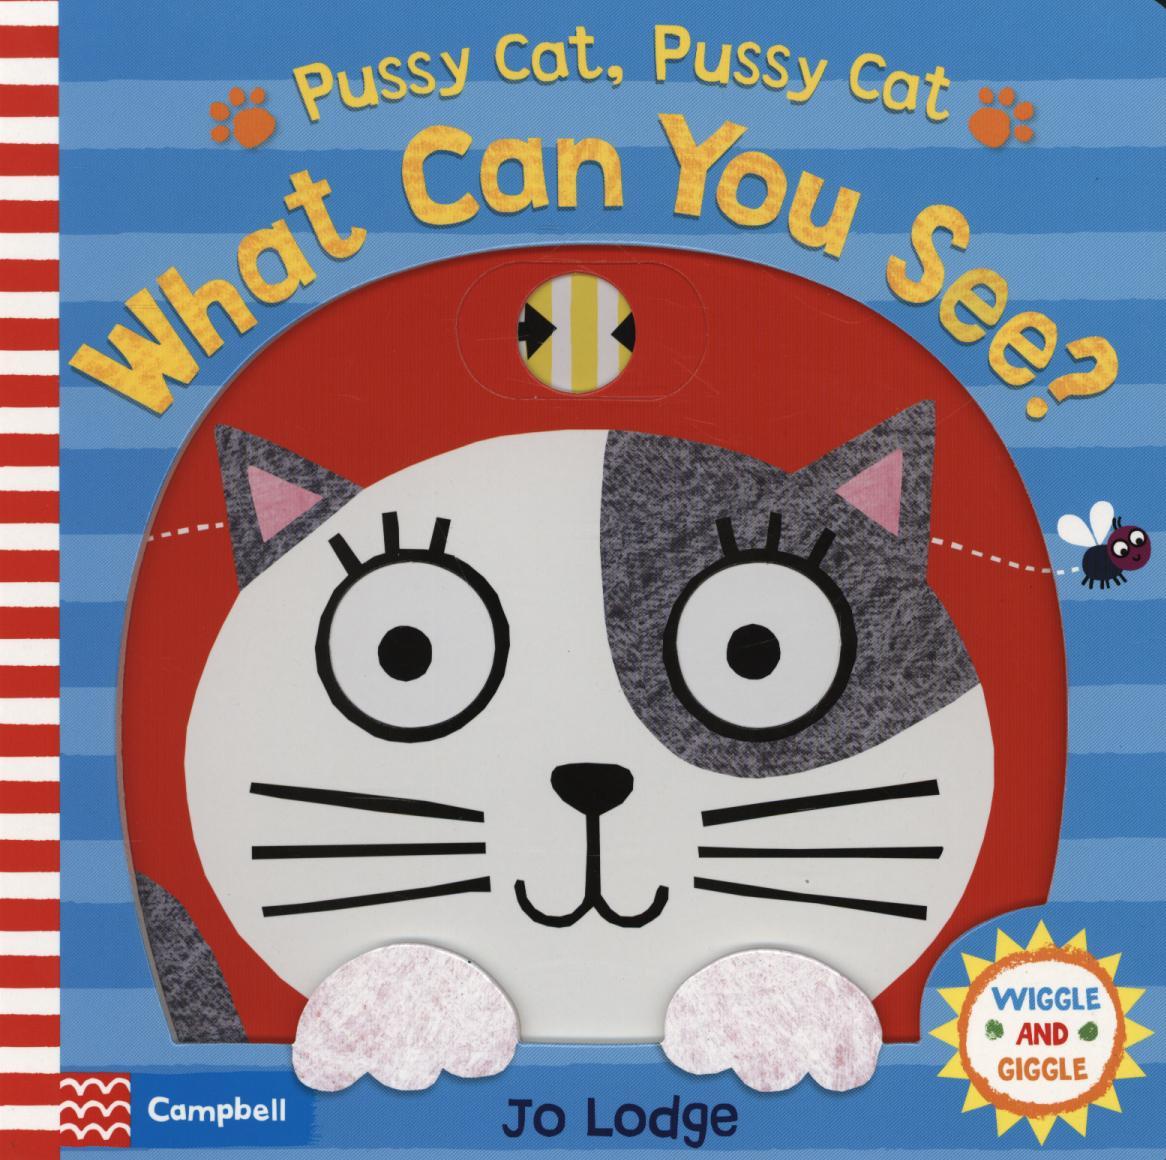 Pussy Cat, Pussy Cat, What Can You See?